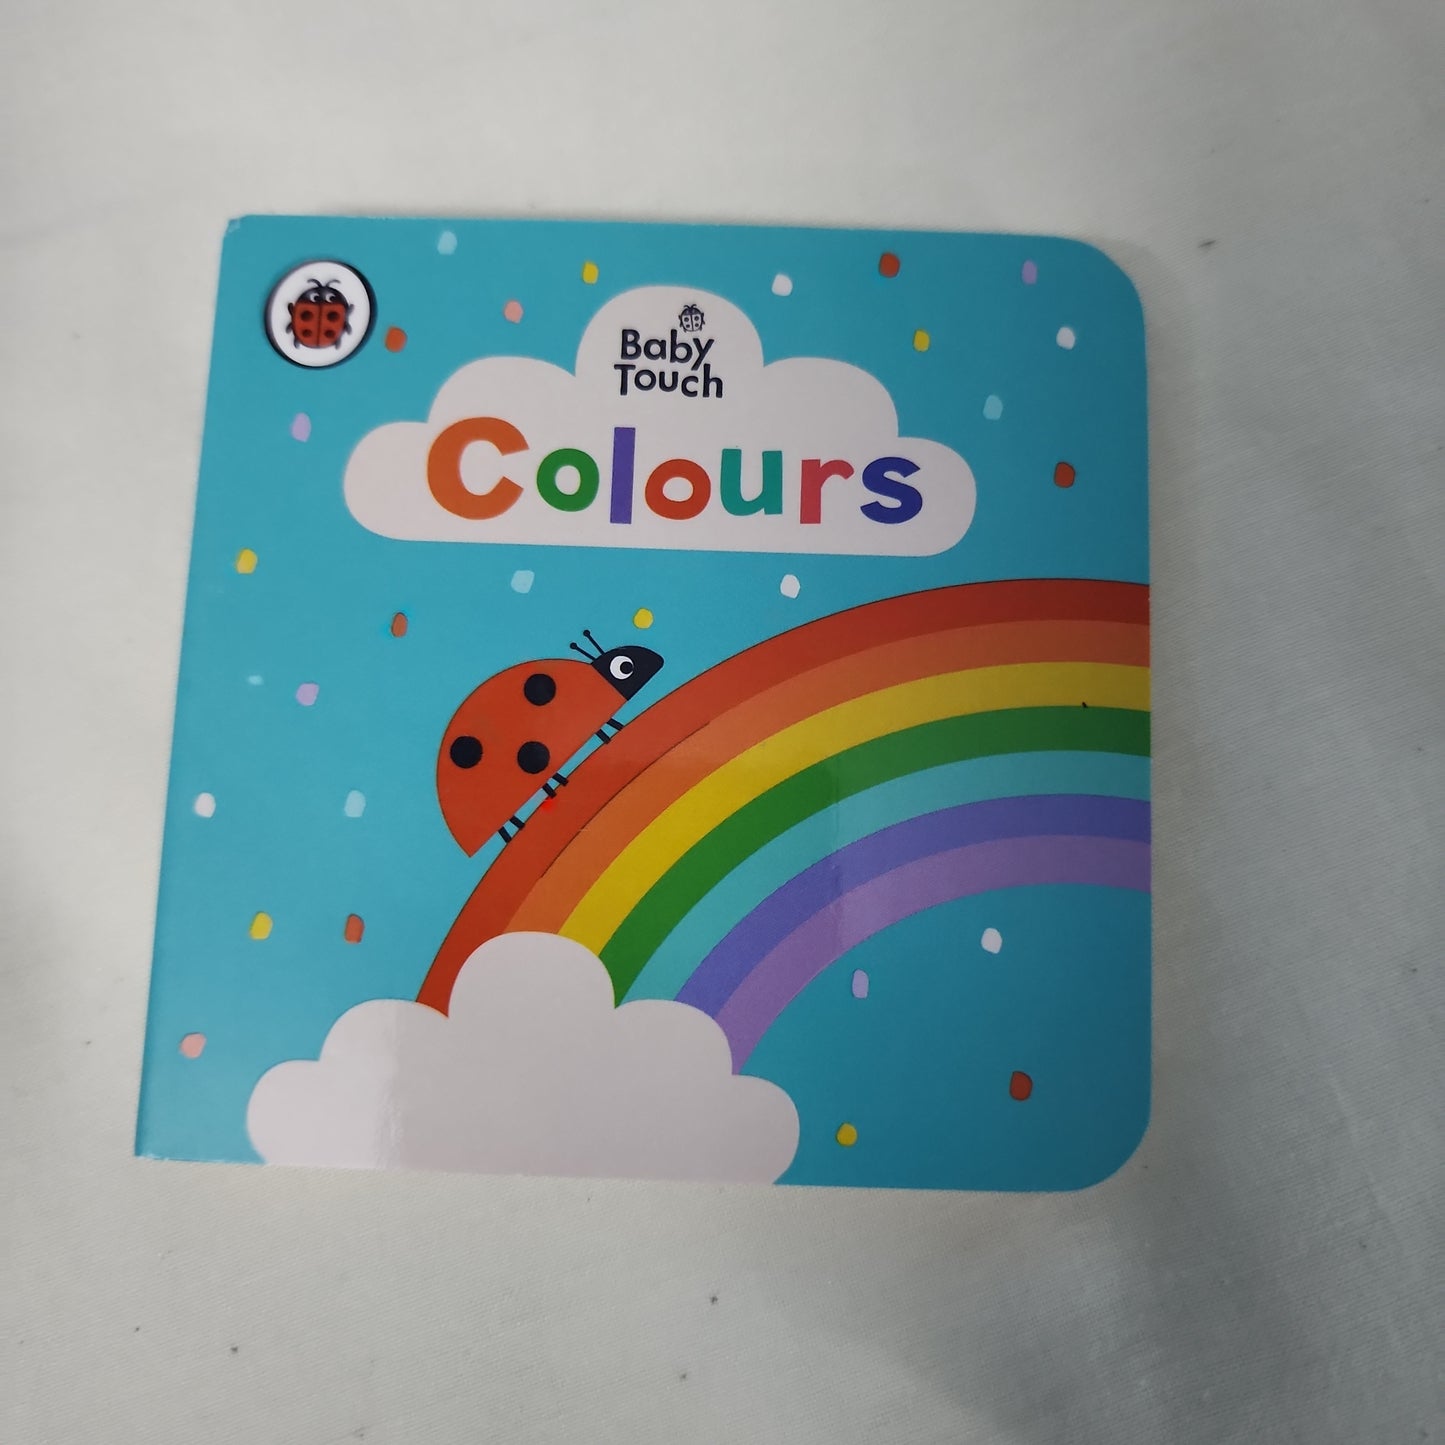 Colours - Little Board book - As Good as New